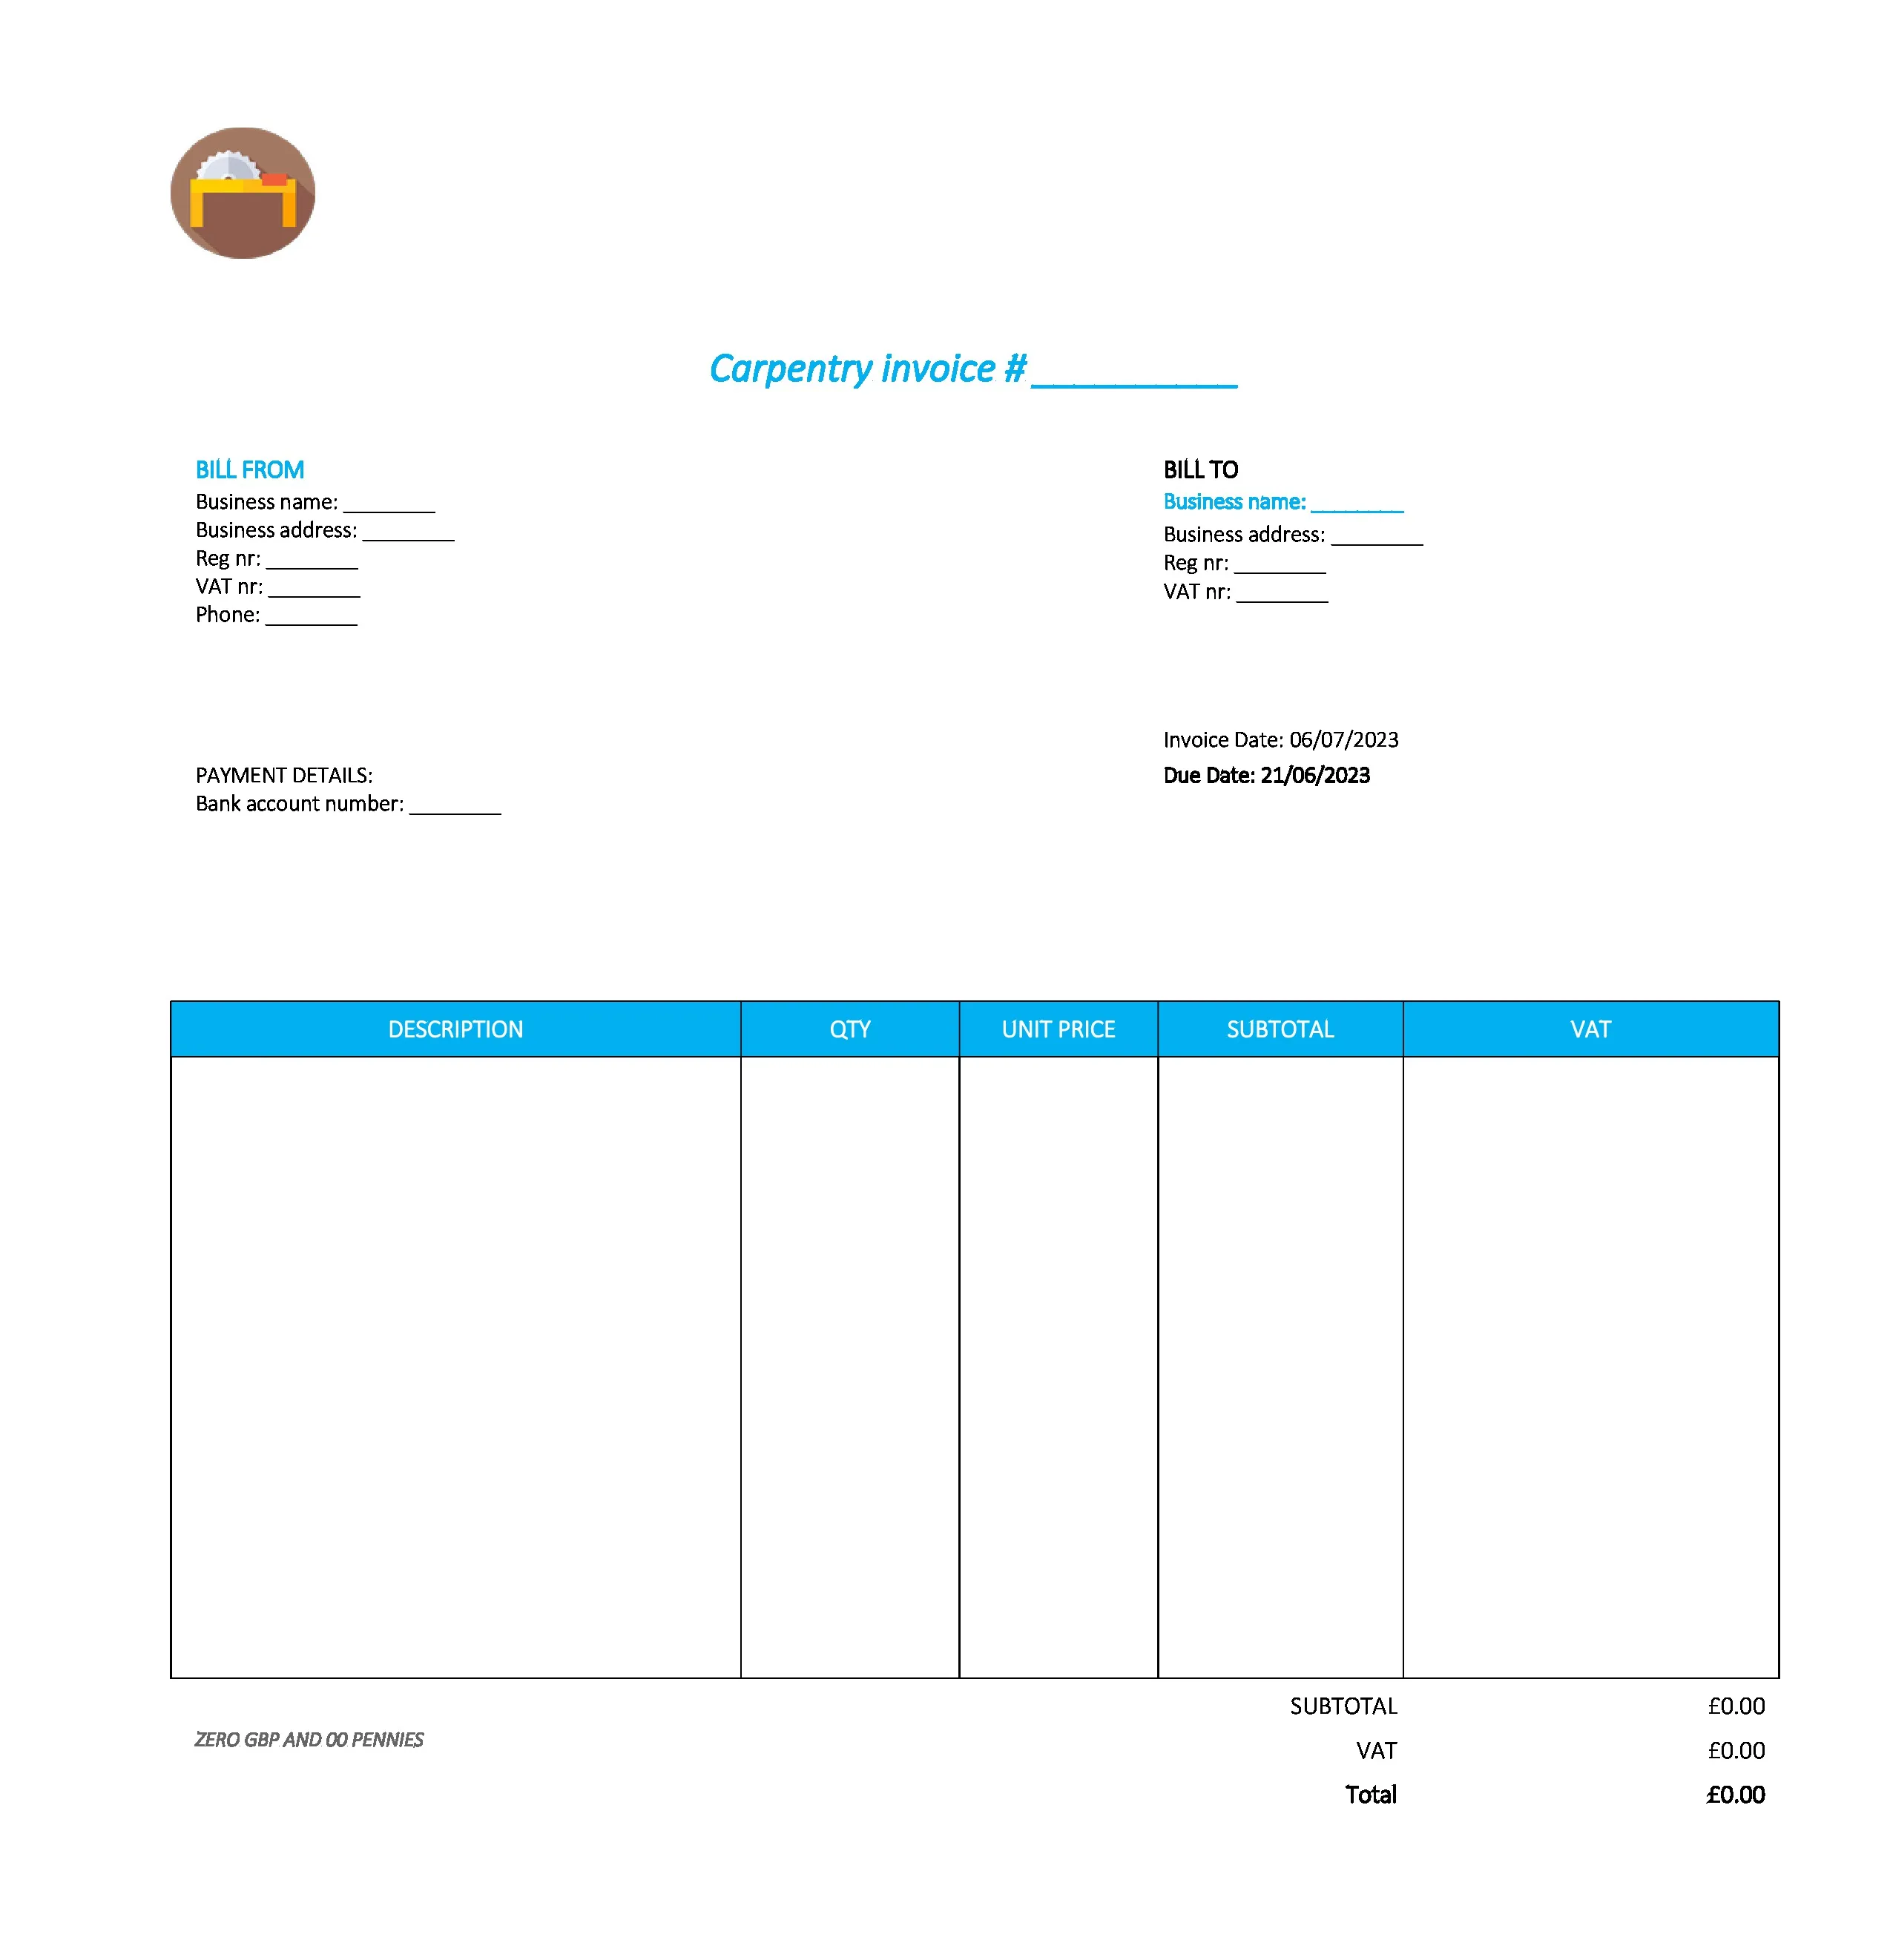 good carpentry invoice template UK Excel / Google sheets